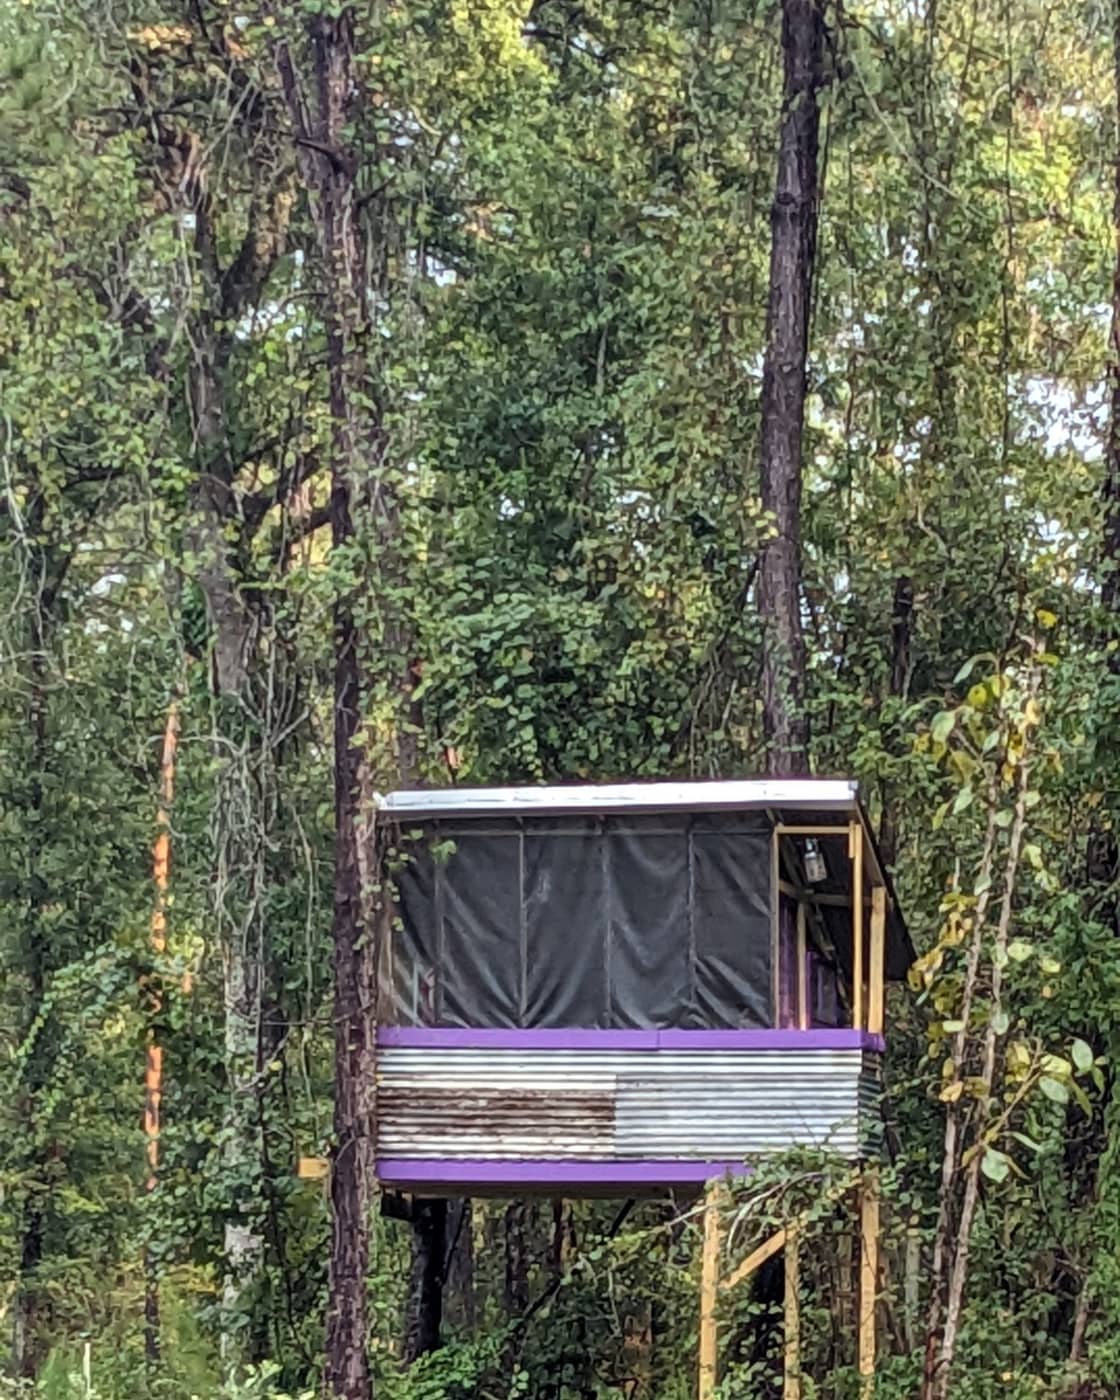 Our "recycled materials" treehouse looks out over 4 acres of blueberry fields.